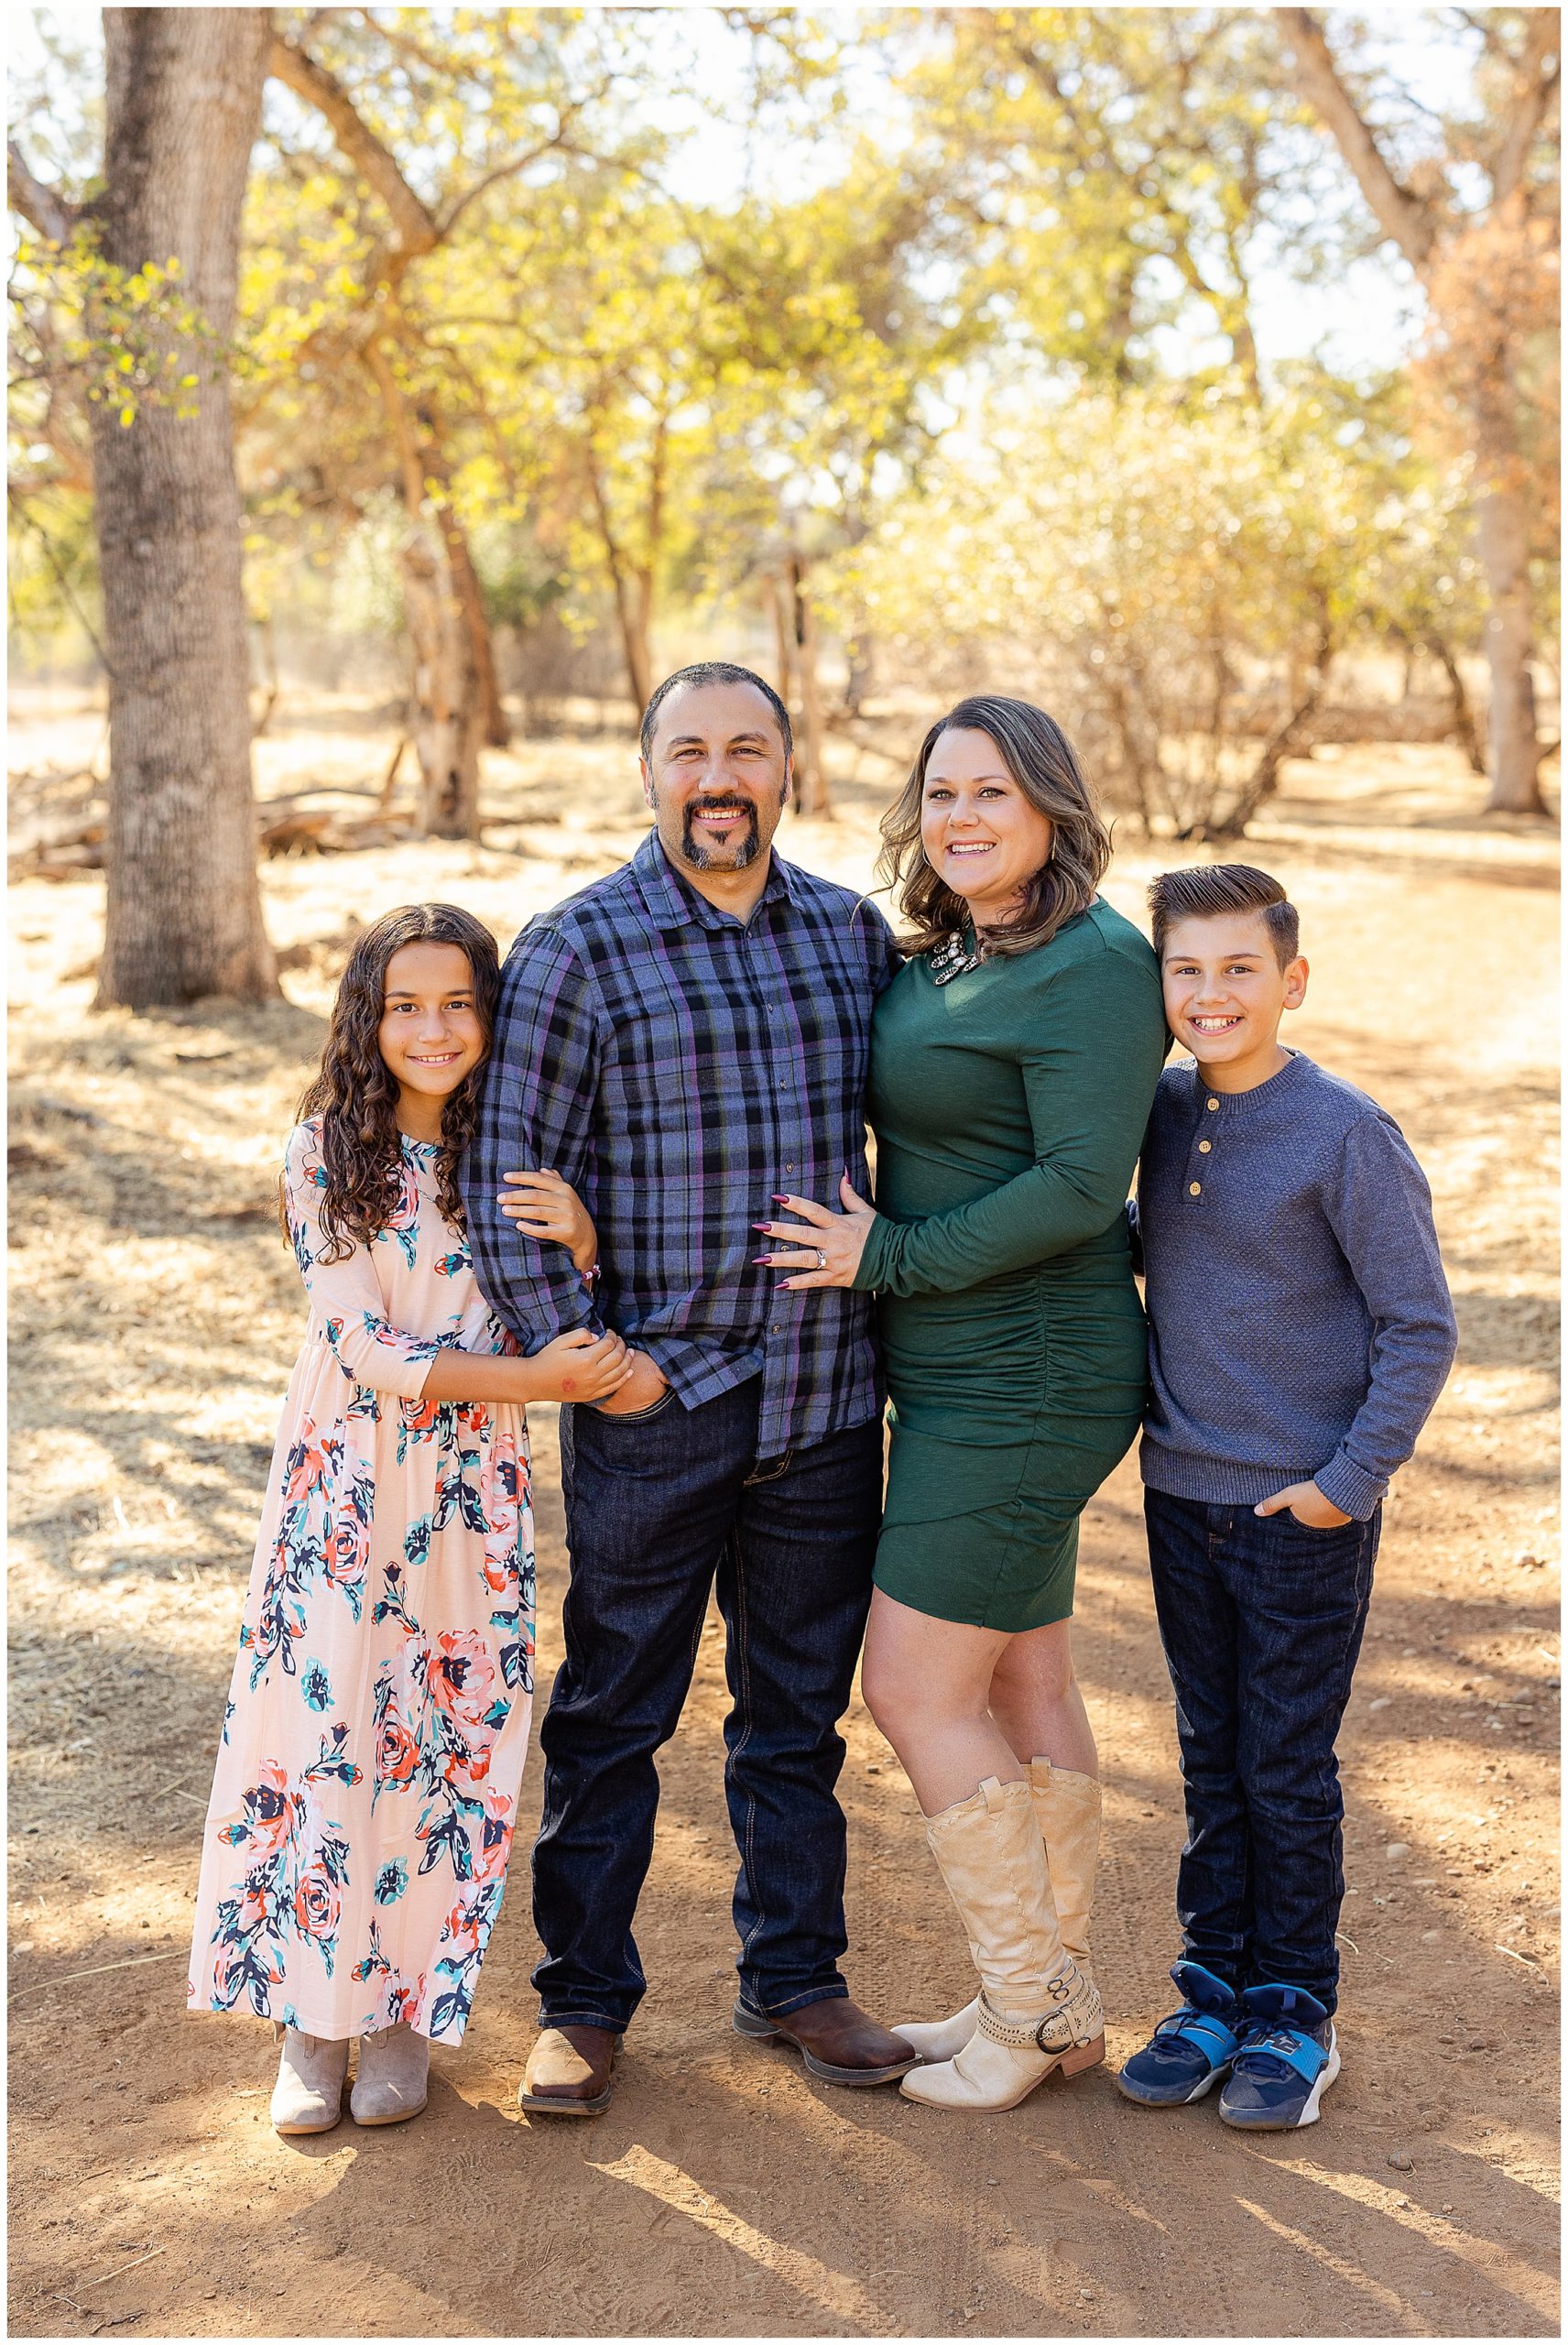 Upper Park Family Session on Trail | Amy + Mike